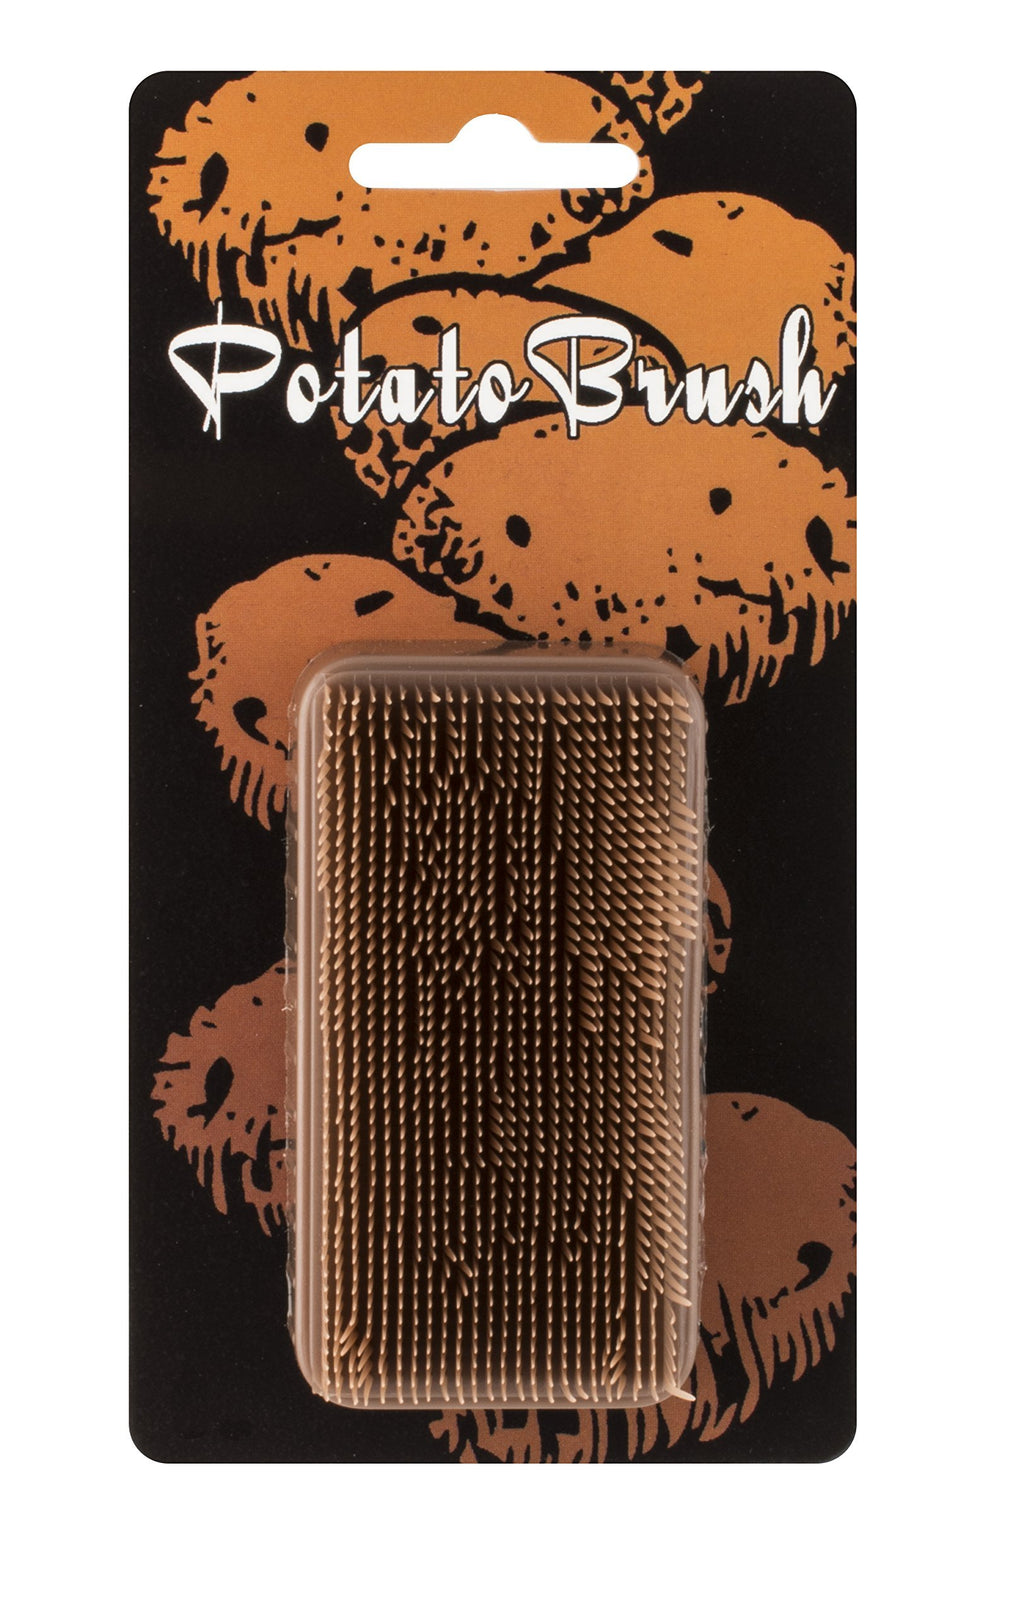 Bay Mill Potato Brush and Vegetable Scrubber, 1.5 x 3-Inches